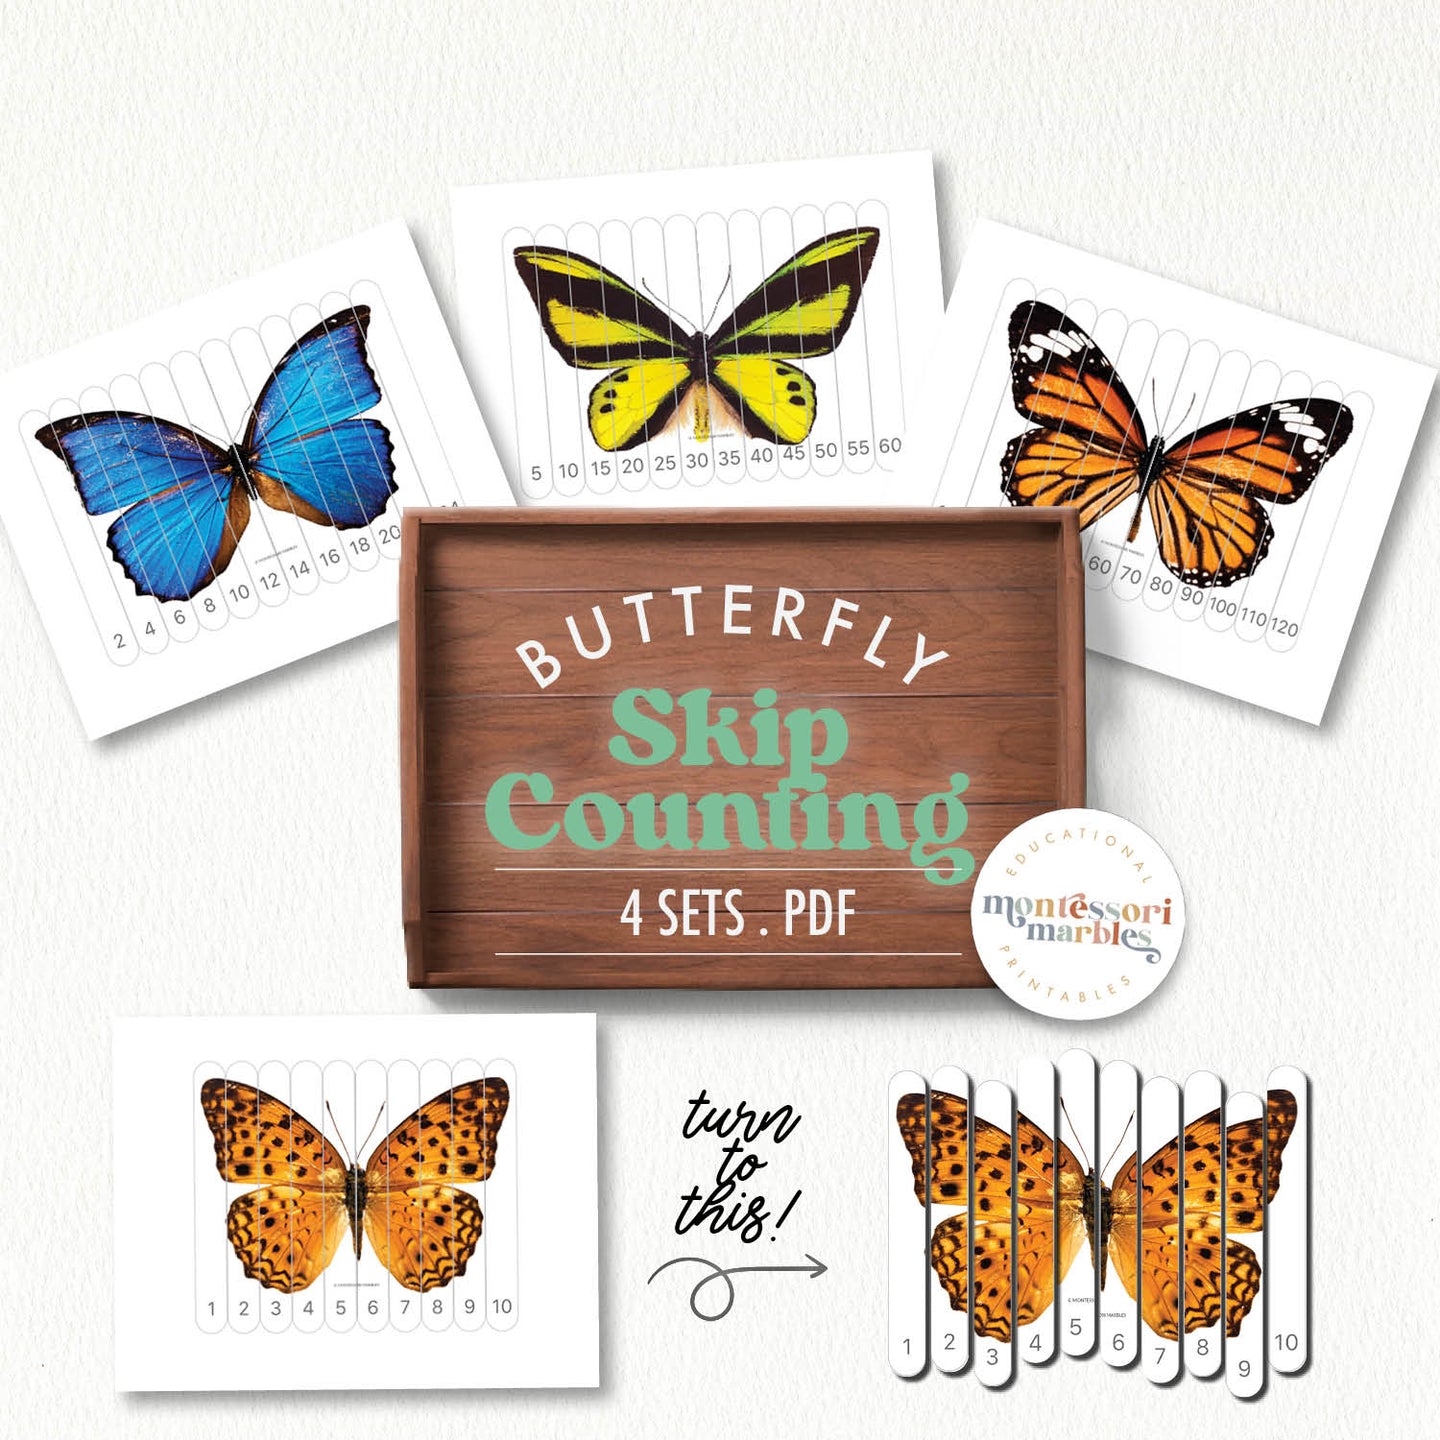 Butterfly Skip Counting